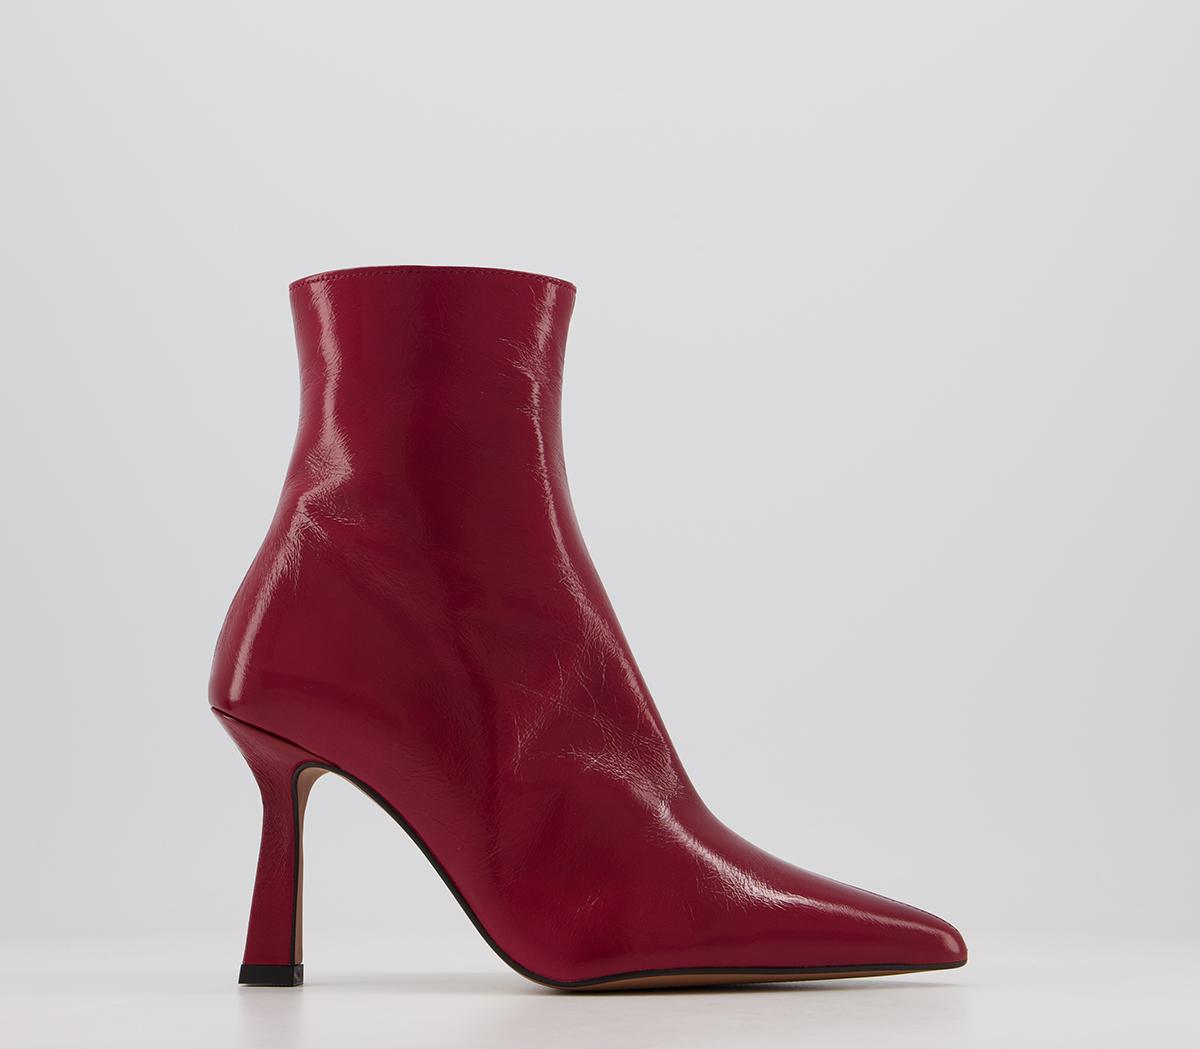 OFFICEAstonished Dressy Point BootsRed Leather